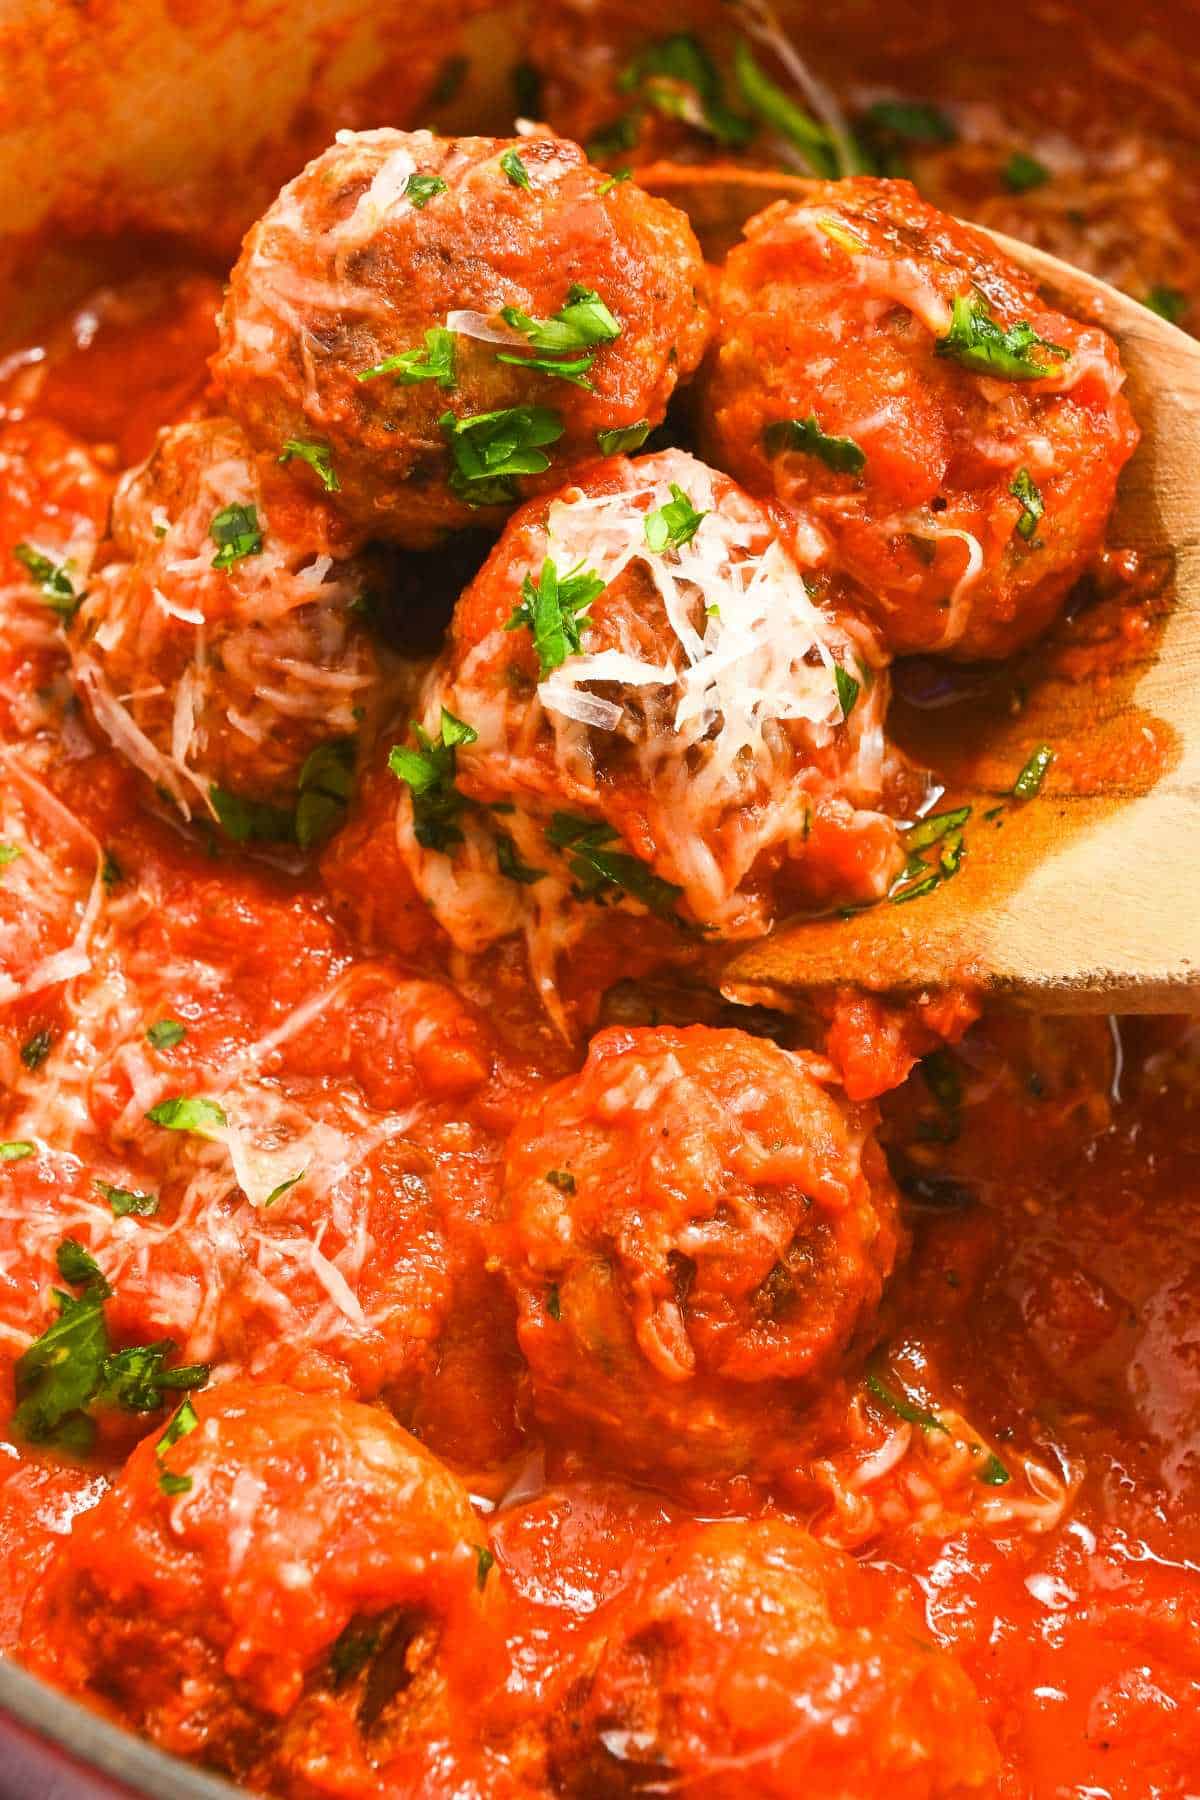 eggless meatballs in red sauce topped with parsley and parmesan cheese.